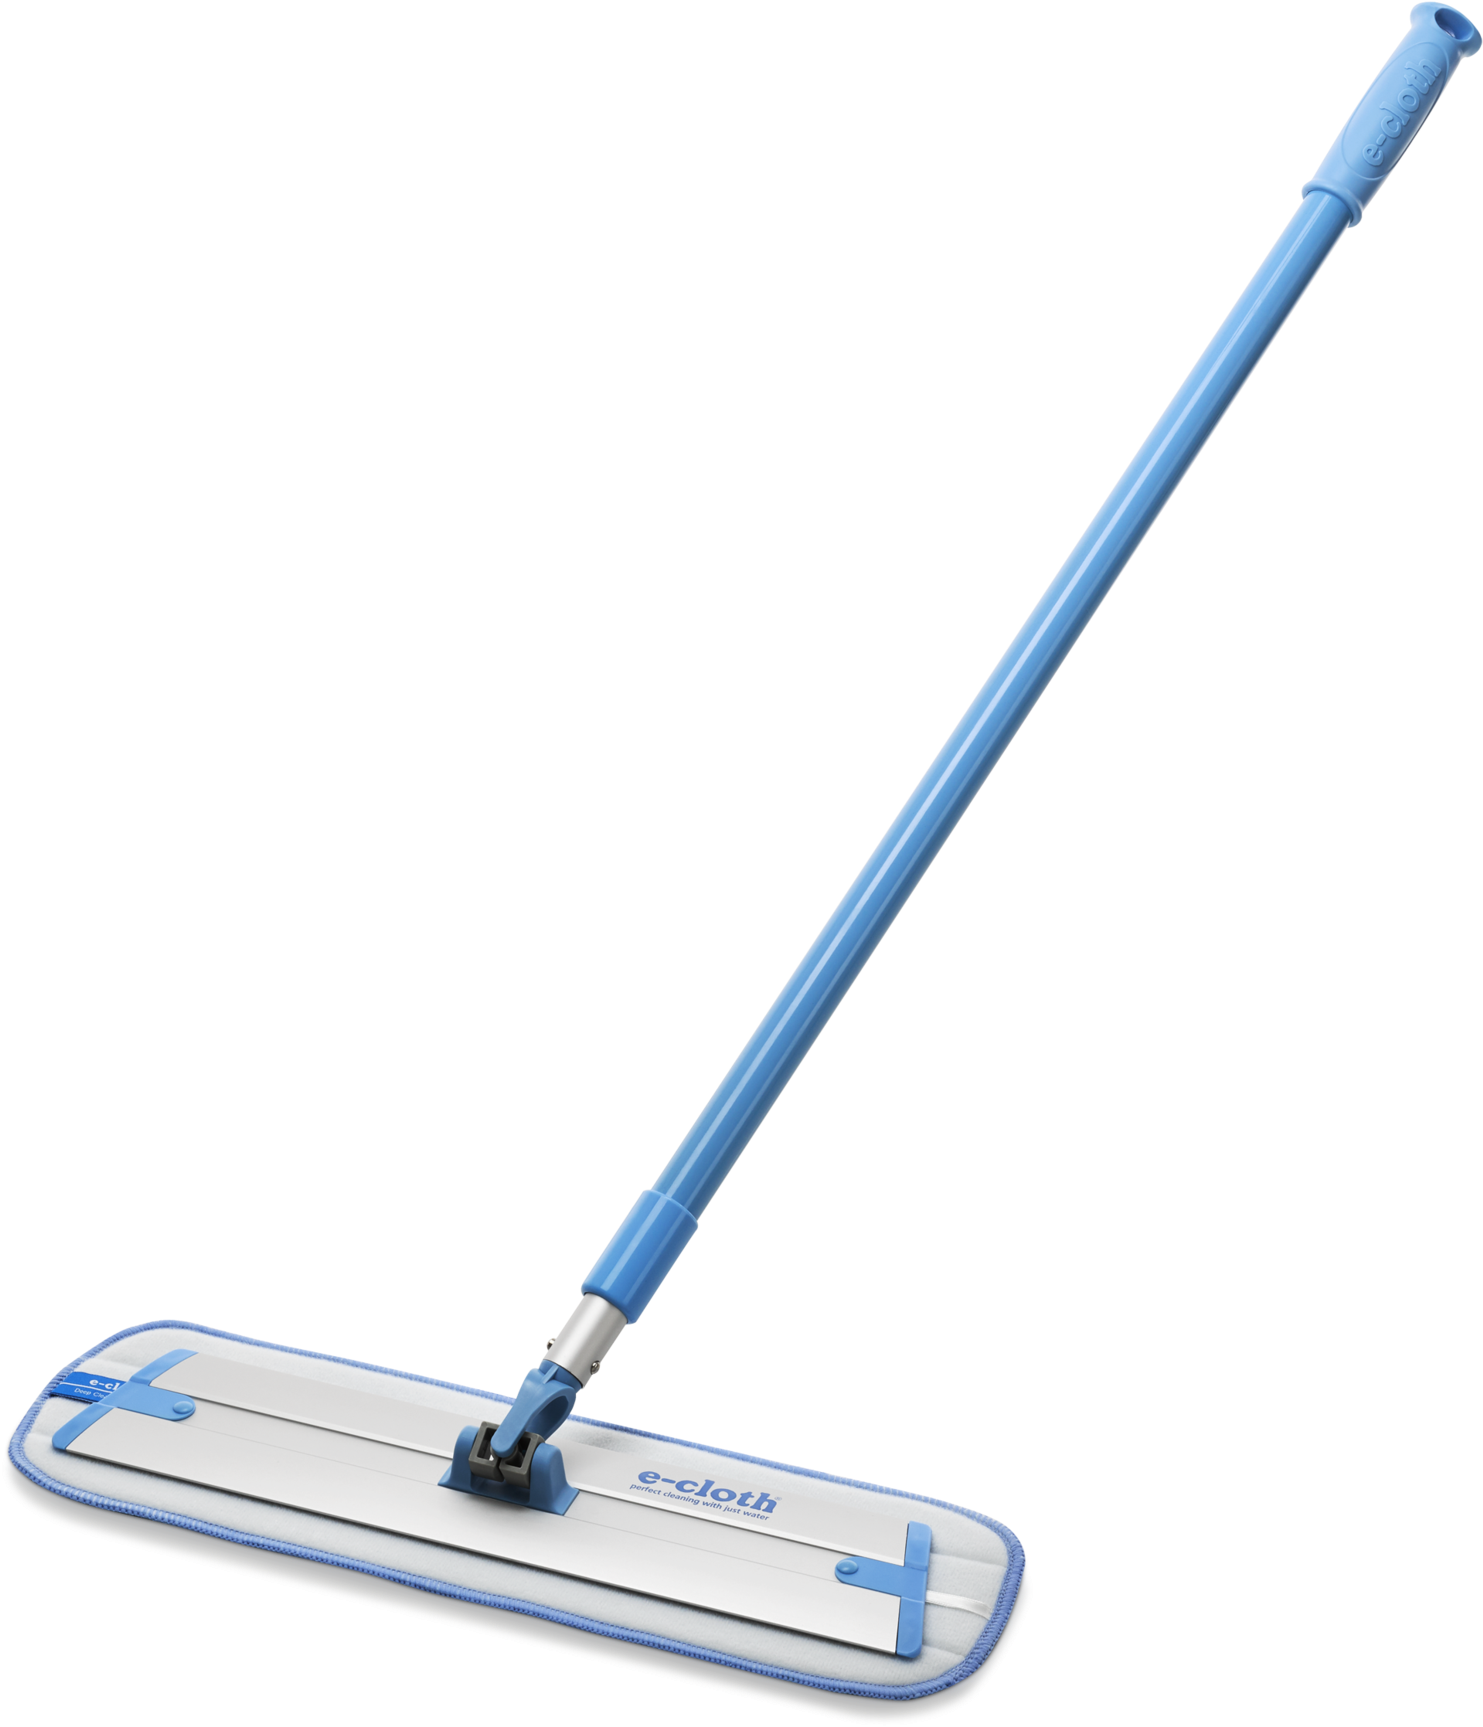 A Mop With A Blue Handle